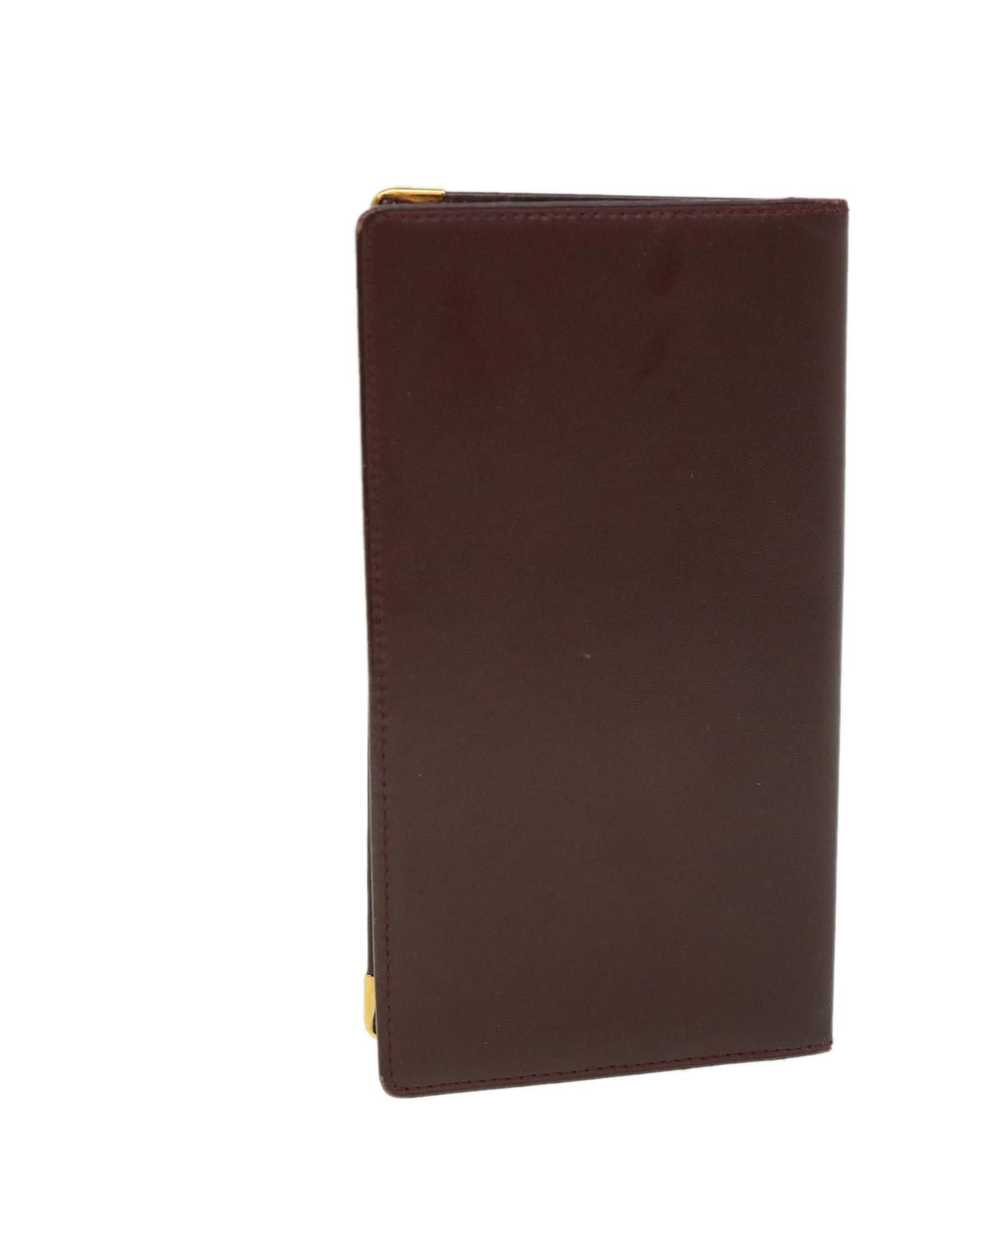 Cartier Leather Card Case in Wine Red - image 2